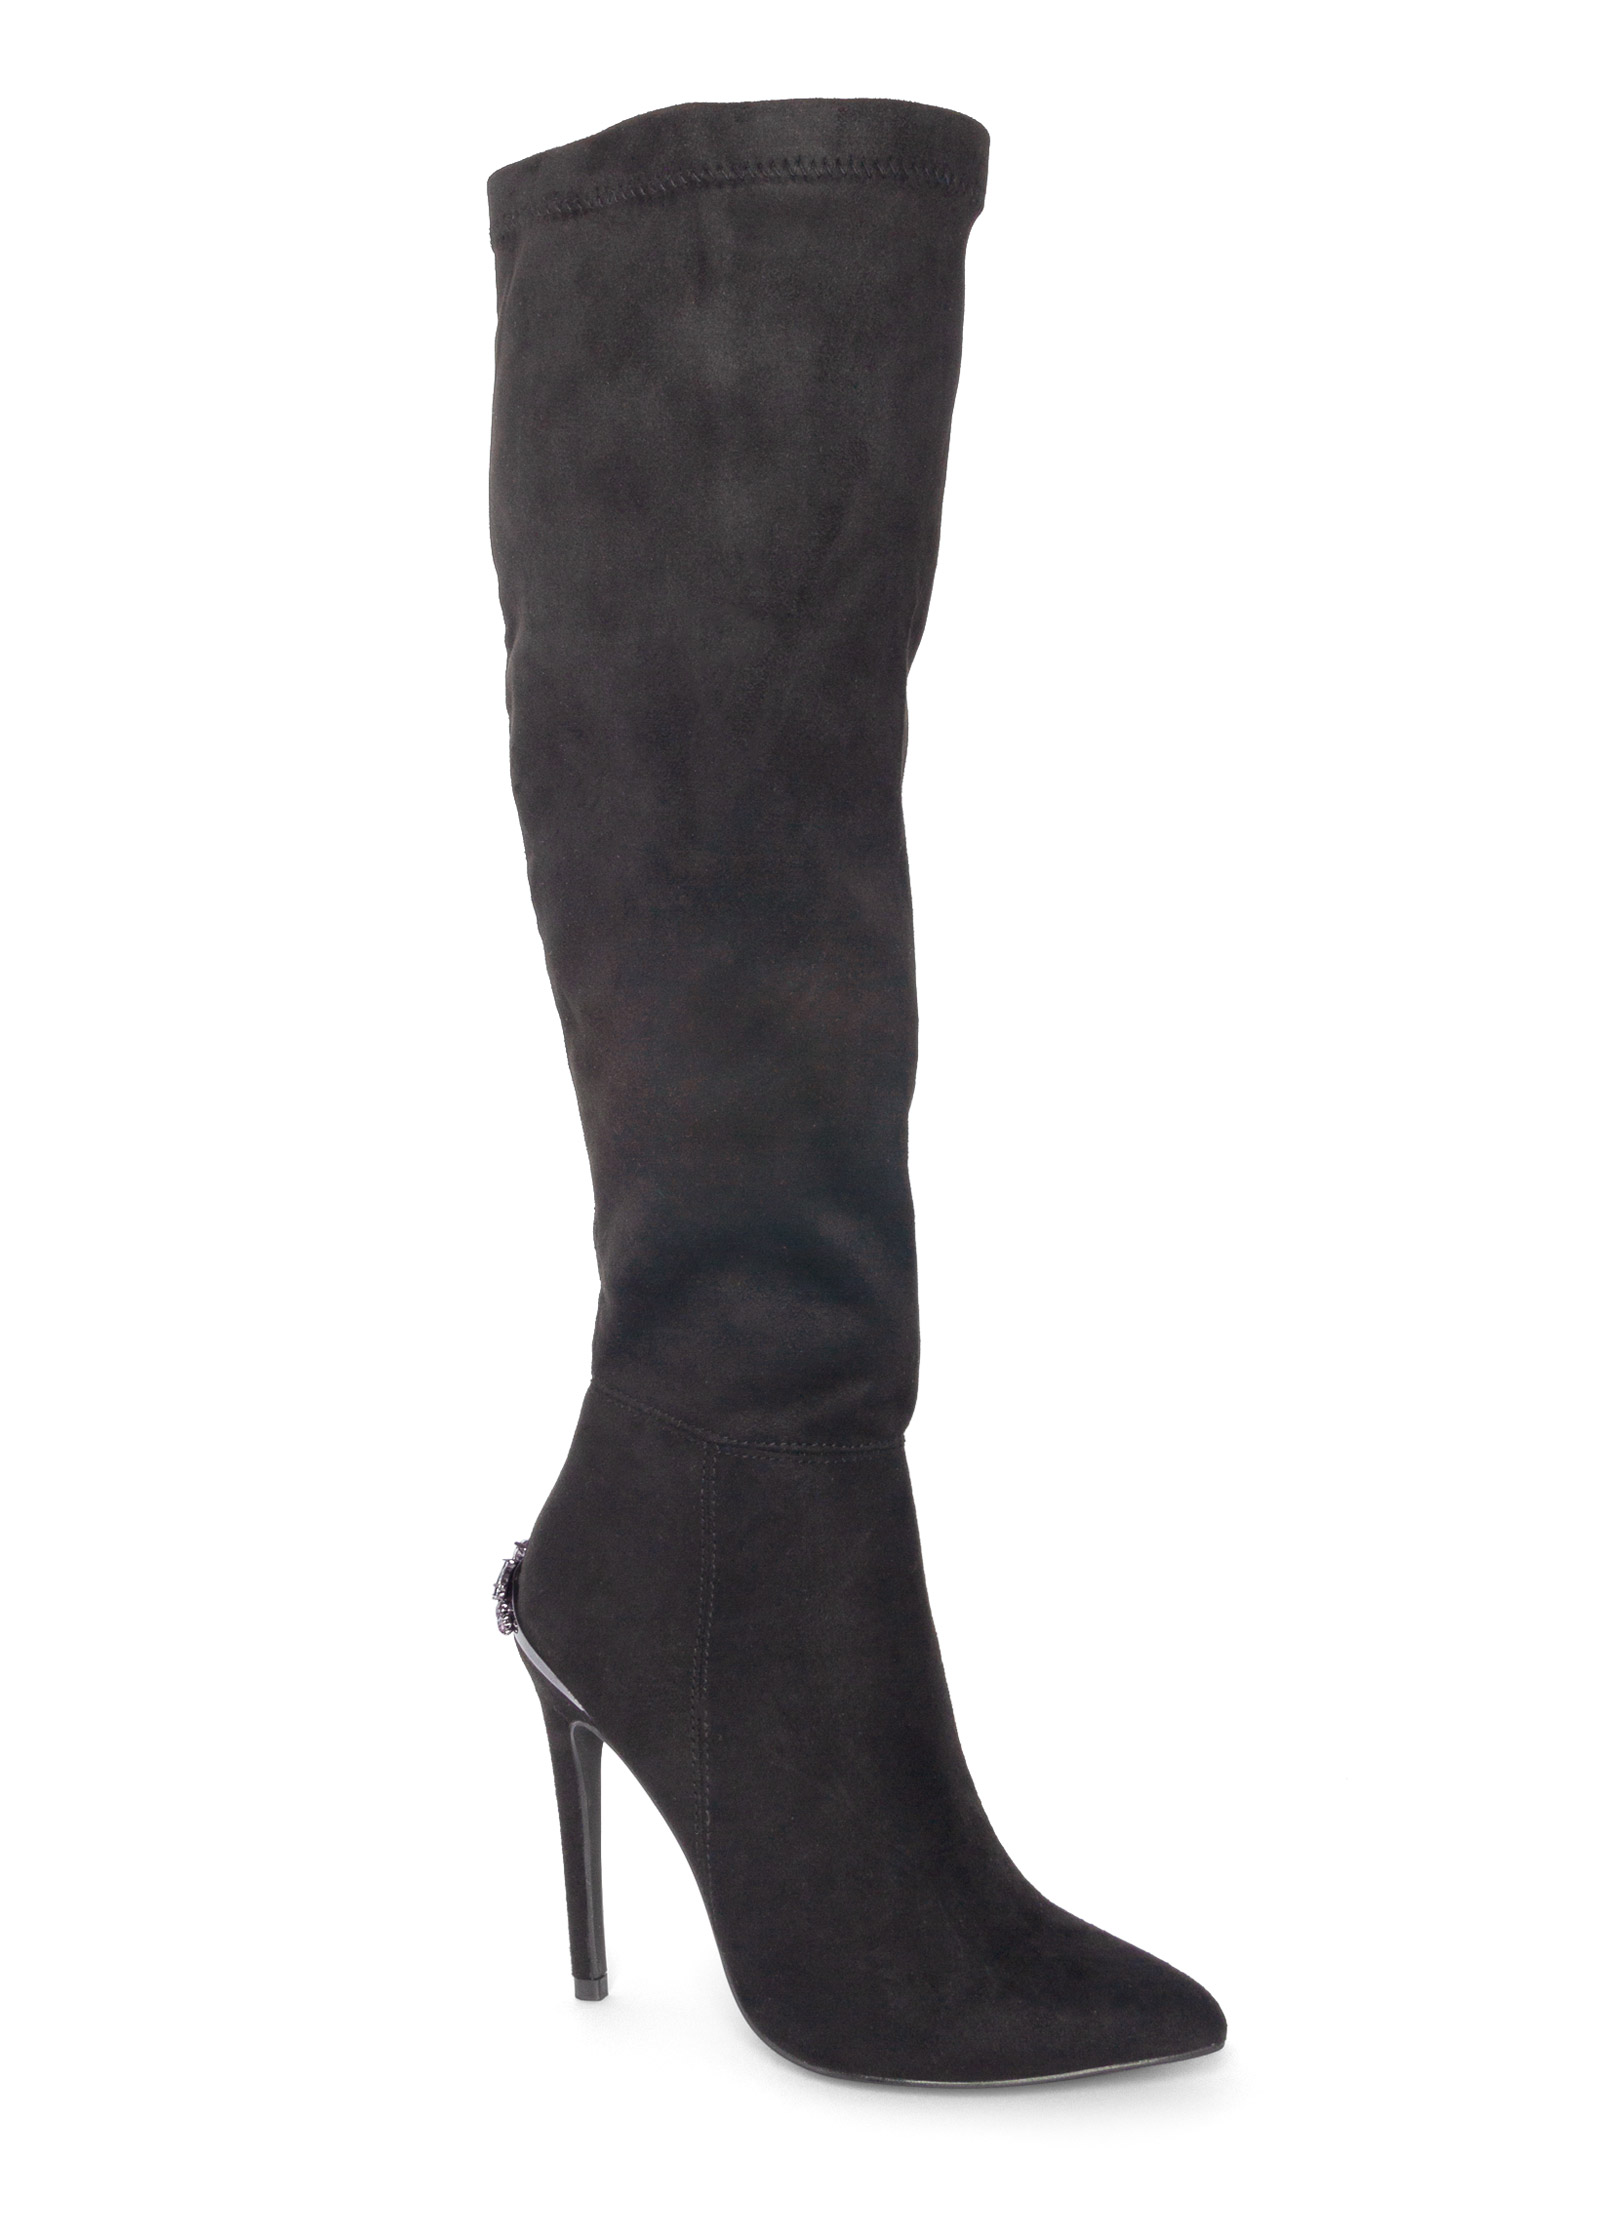 women's slouch boots clearance